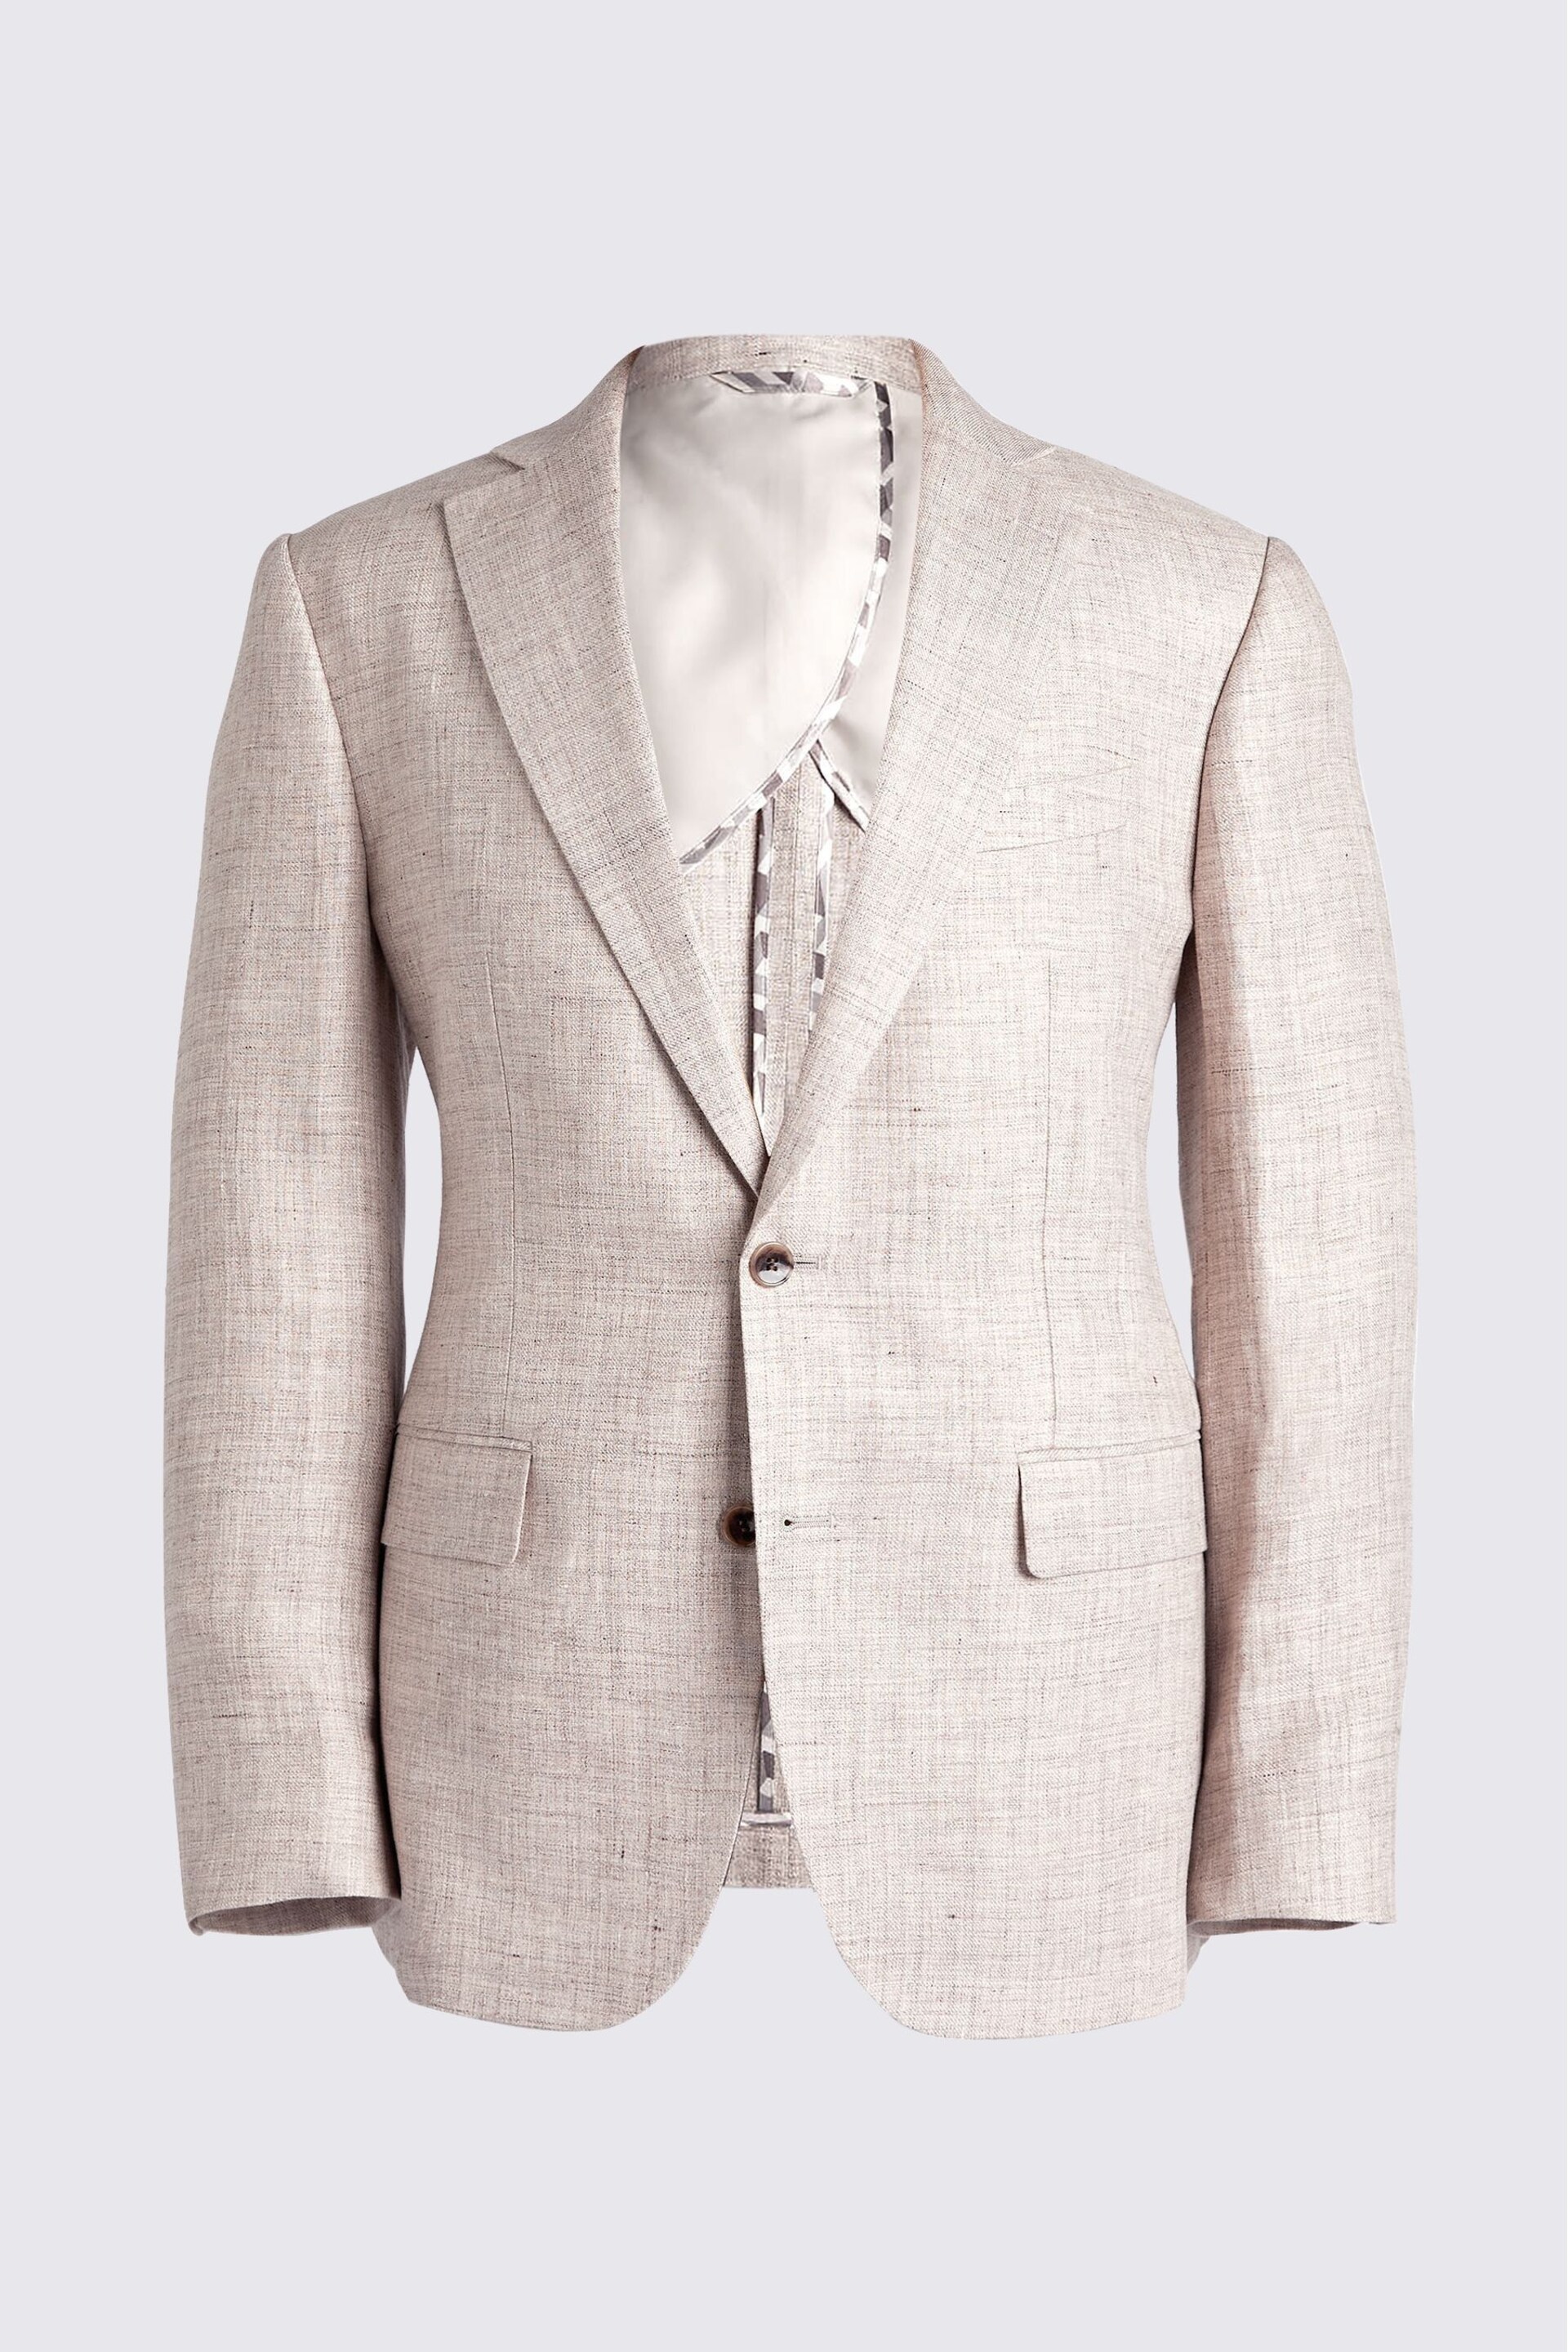 MOSS Oatmeal Nude Tailored Linen Jacket - Image 8 of 8